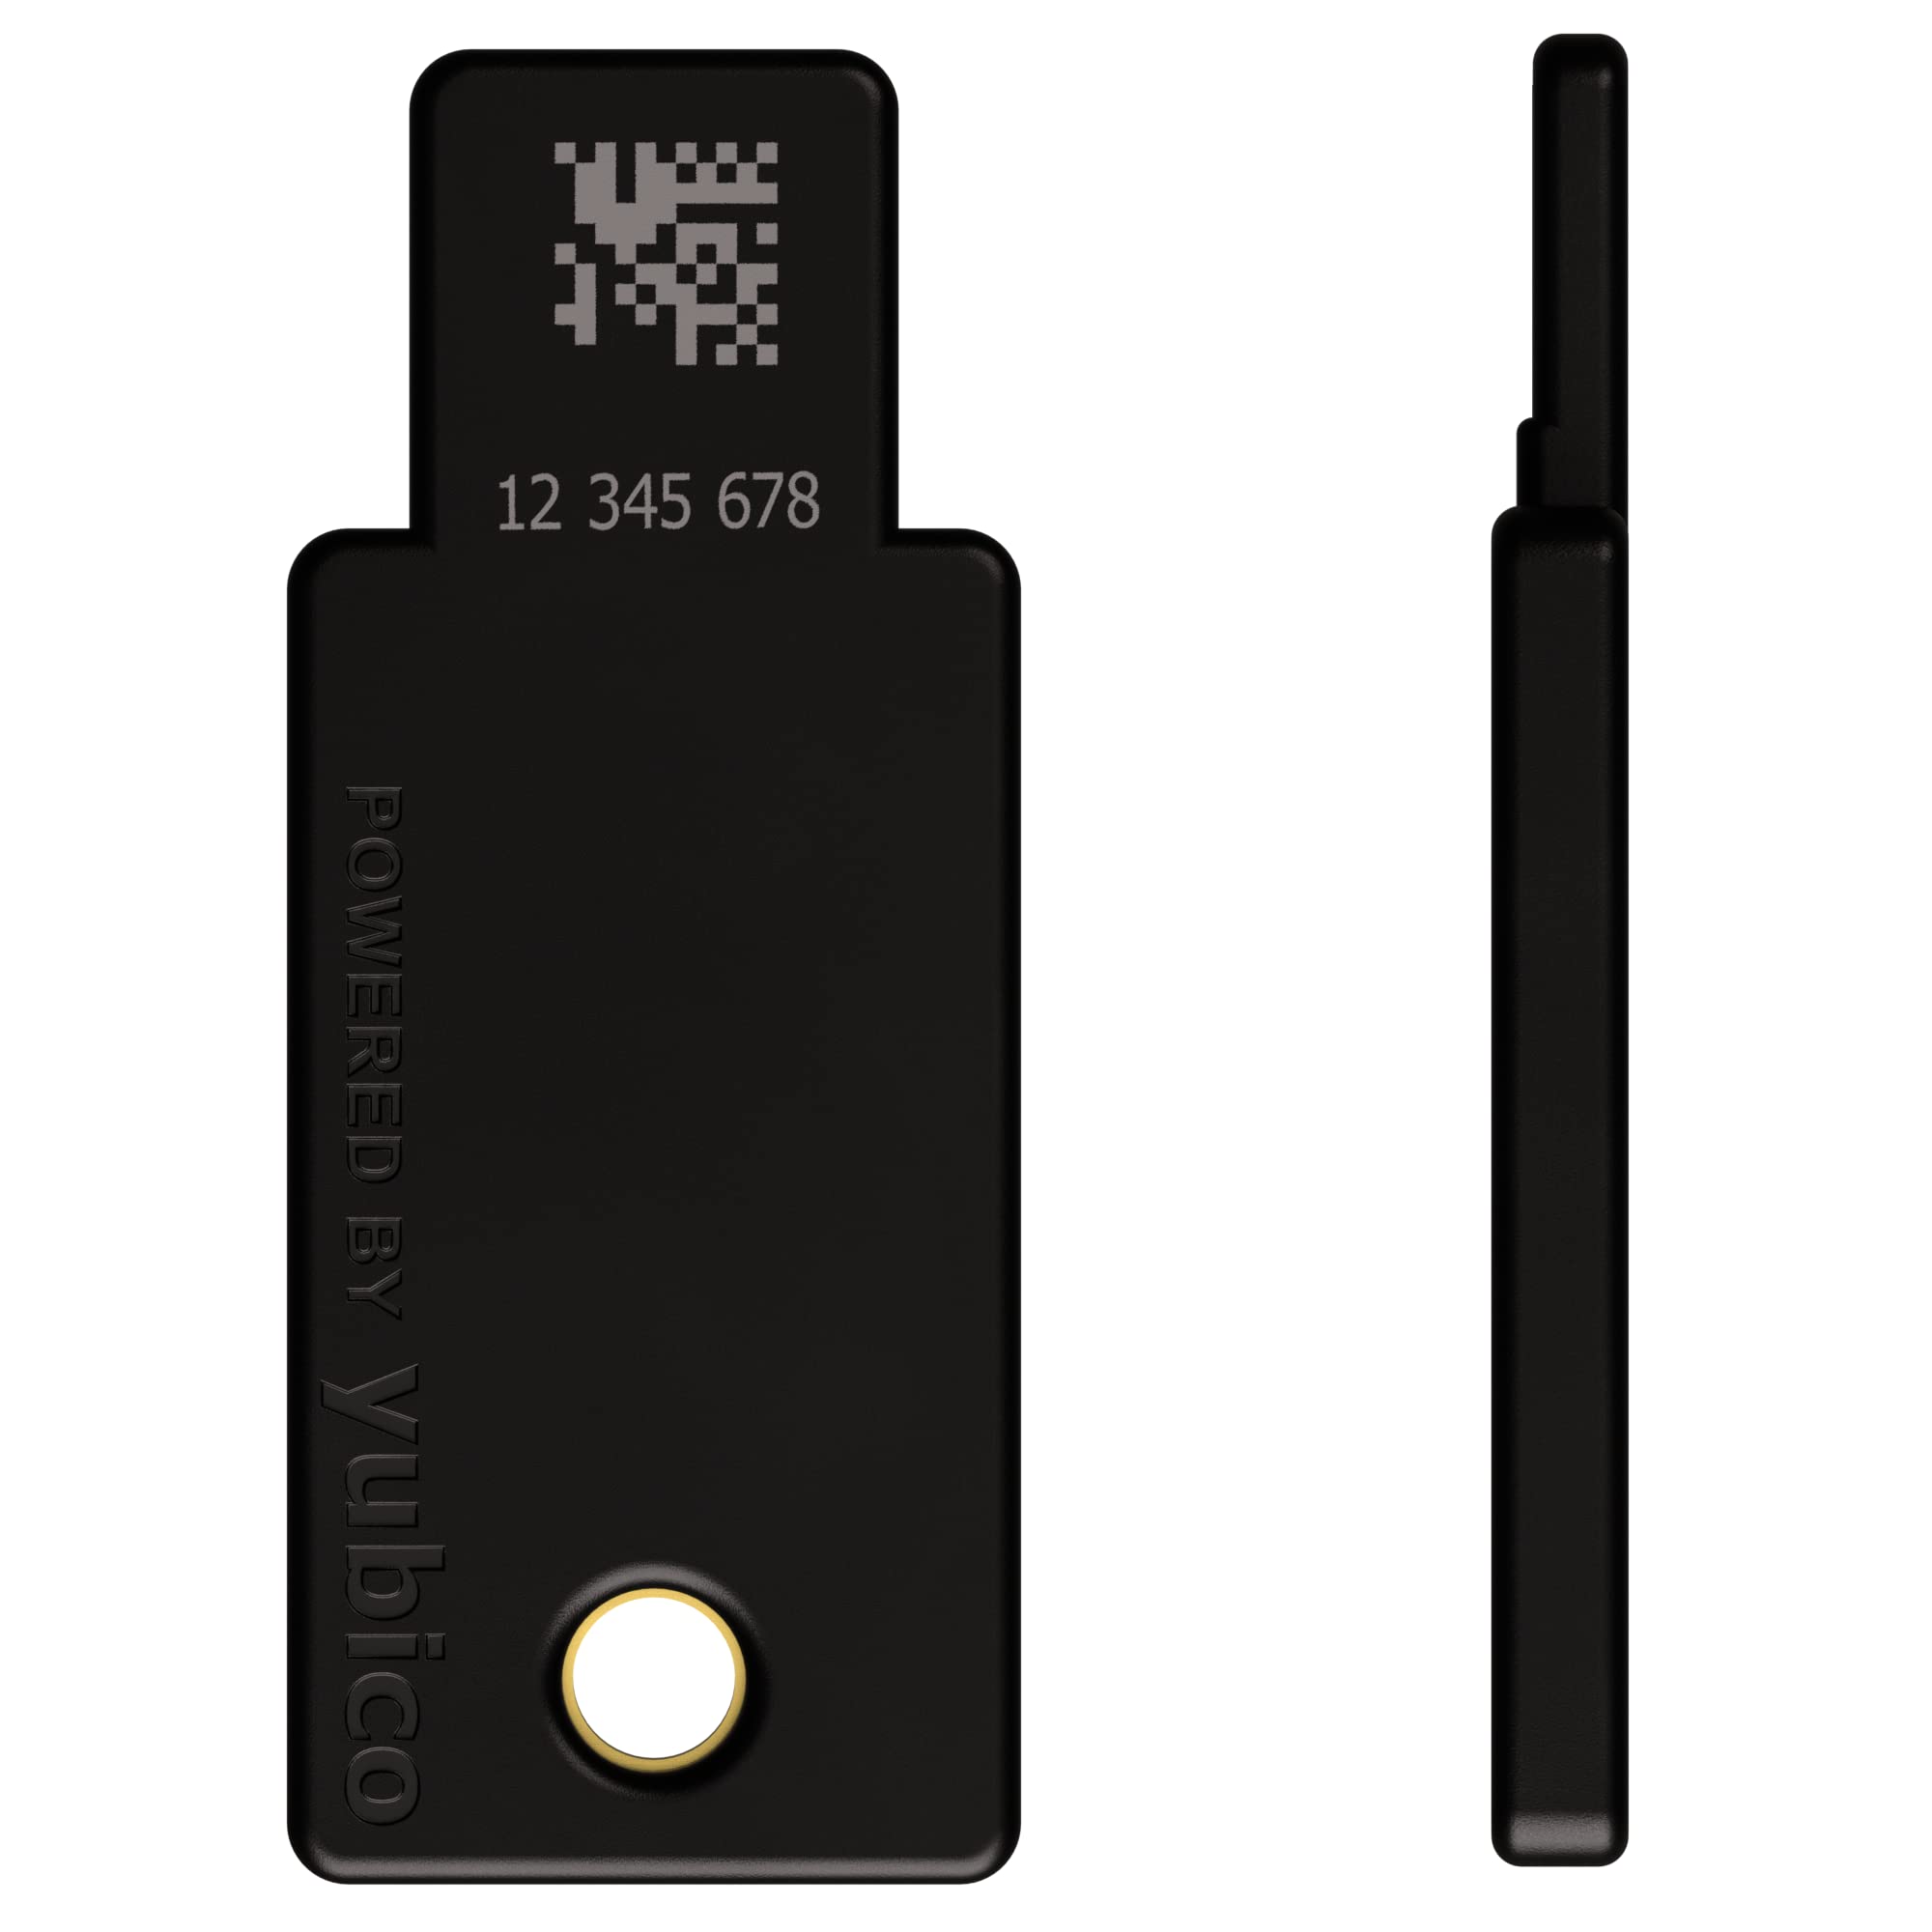 Yubico - YubiKey 5 NFC - Two-Factor authentication (2FA) Security Key, Connect via USB-A or NFC, FIDO Certified - Protect Your Online Accounts